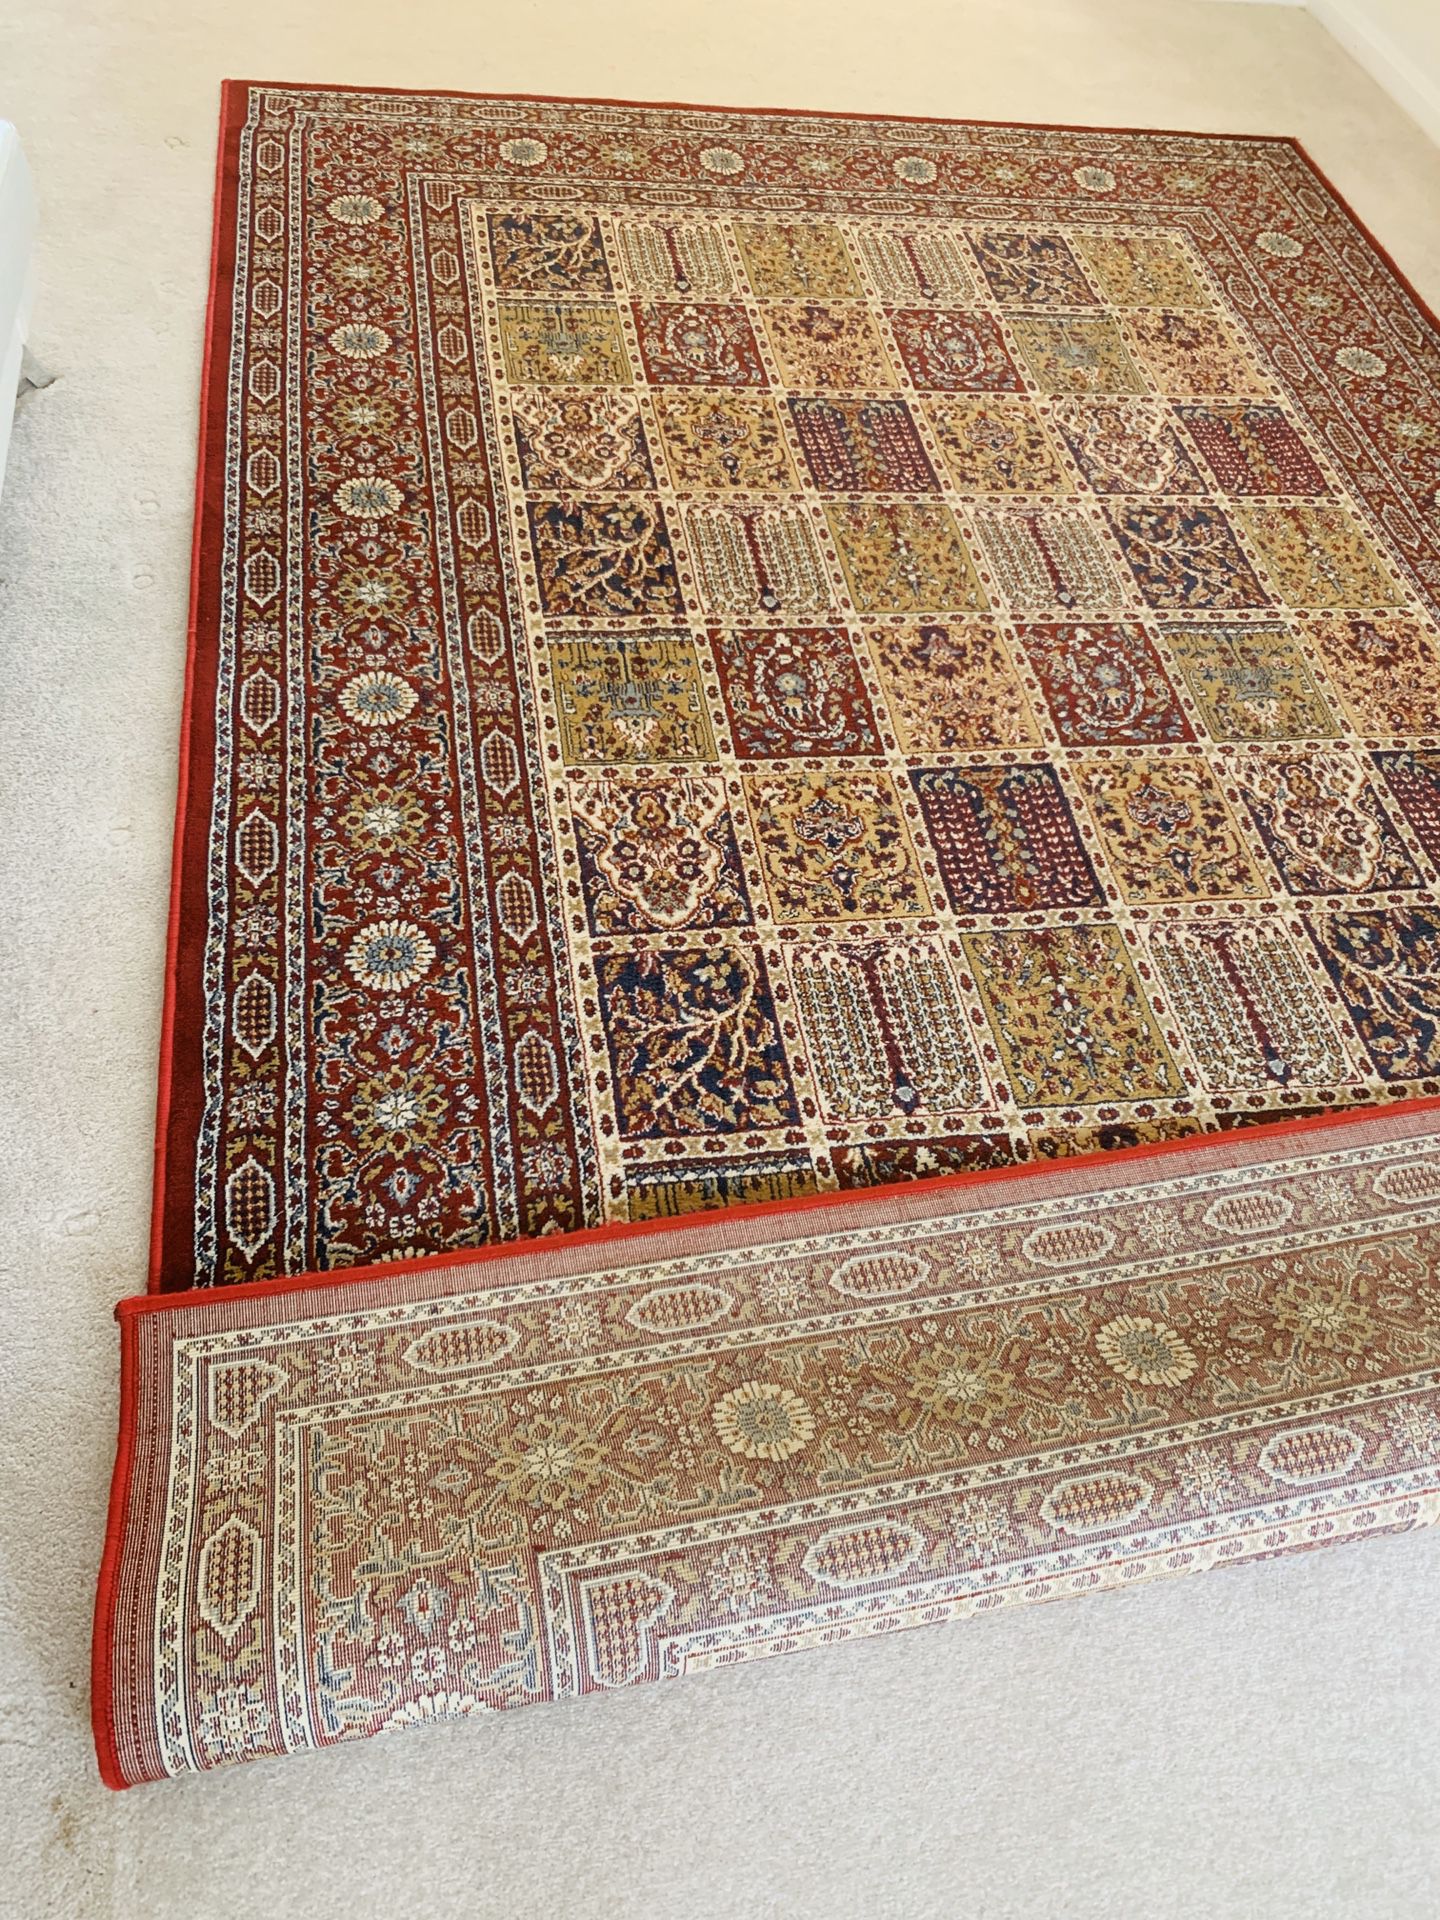 valby ruta rug ikea 6’7”* 9’ 10”. Excellent condition.